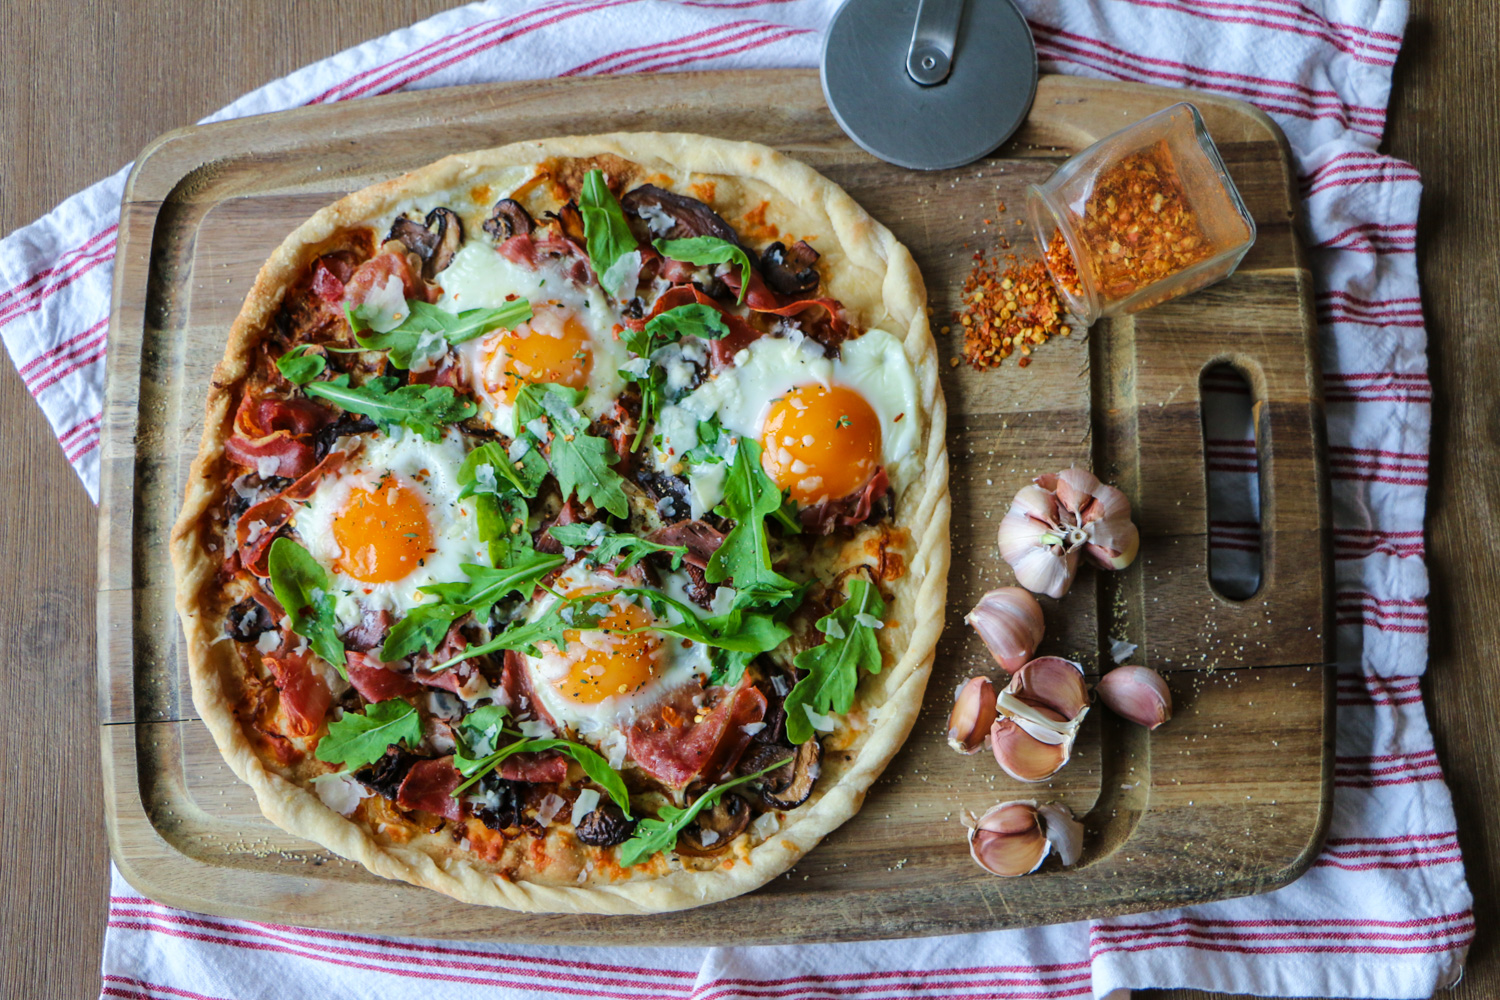 Breakfast pizza with arugula, soft bakes eggs, caramelized onions, and prosciutto